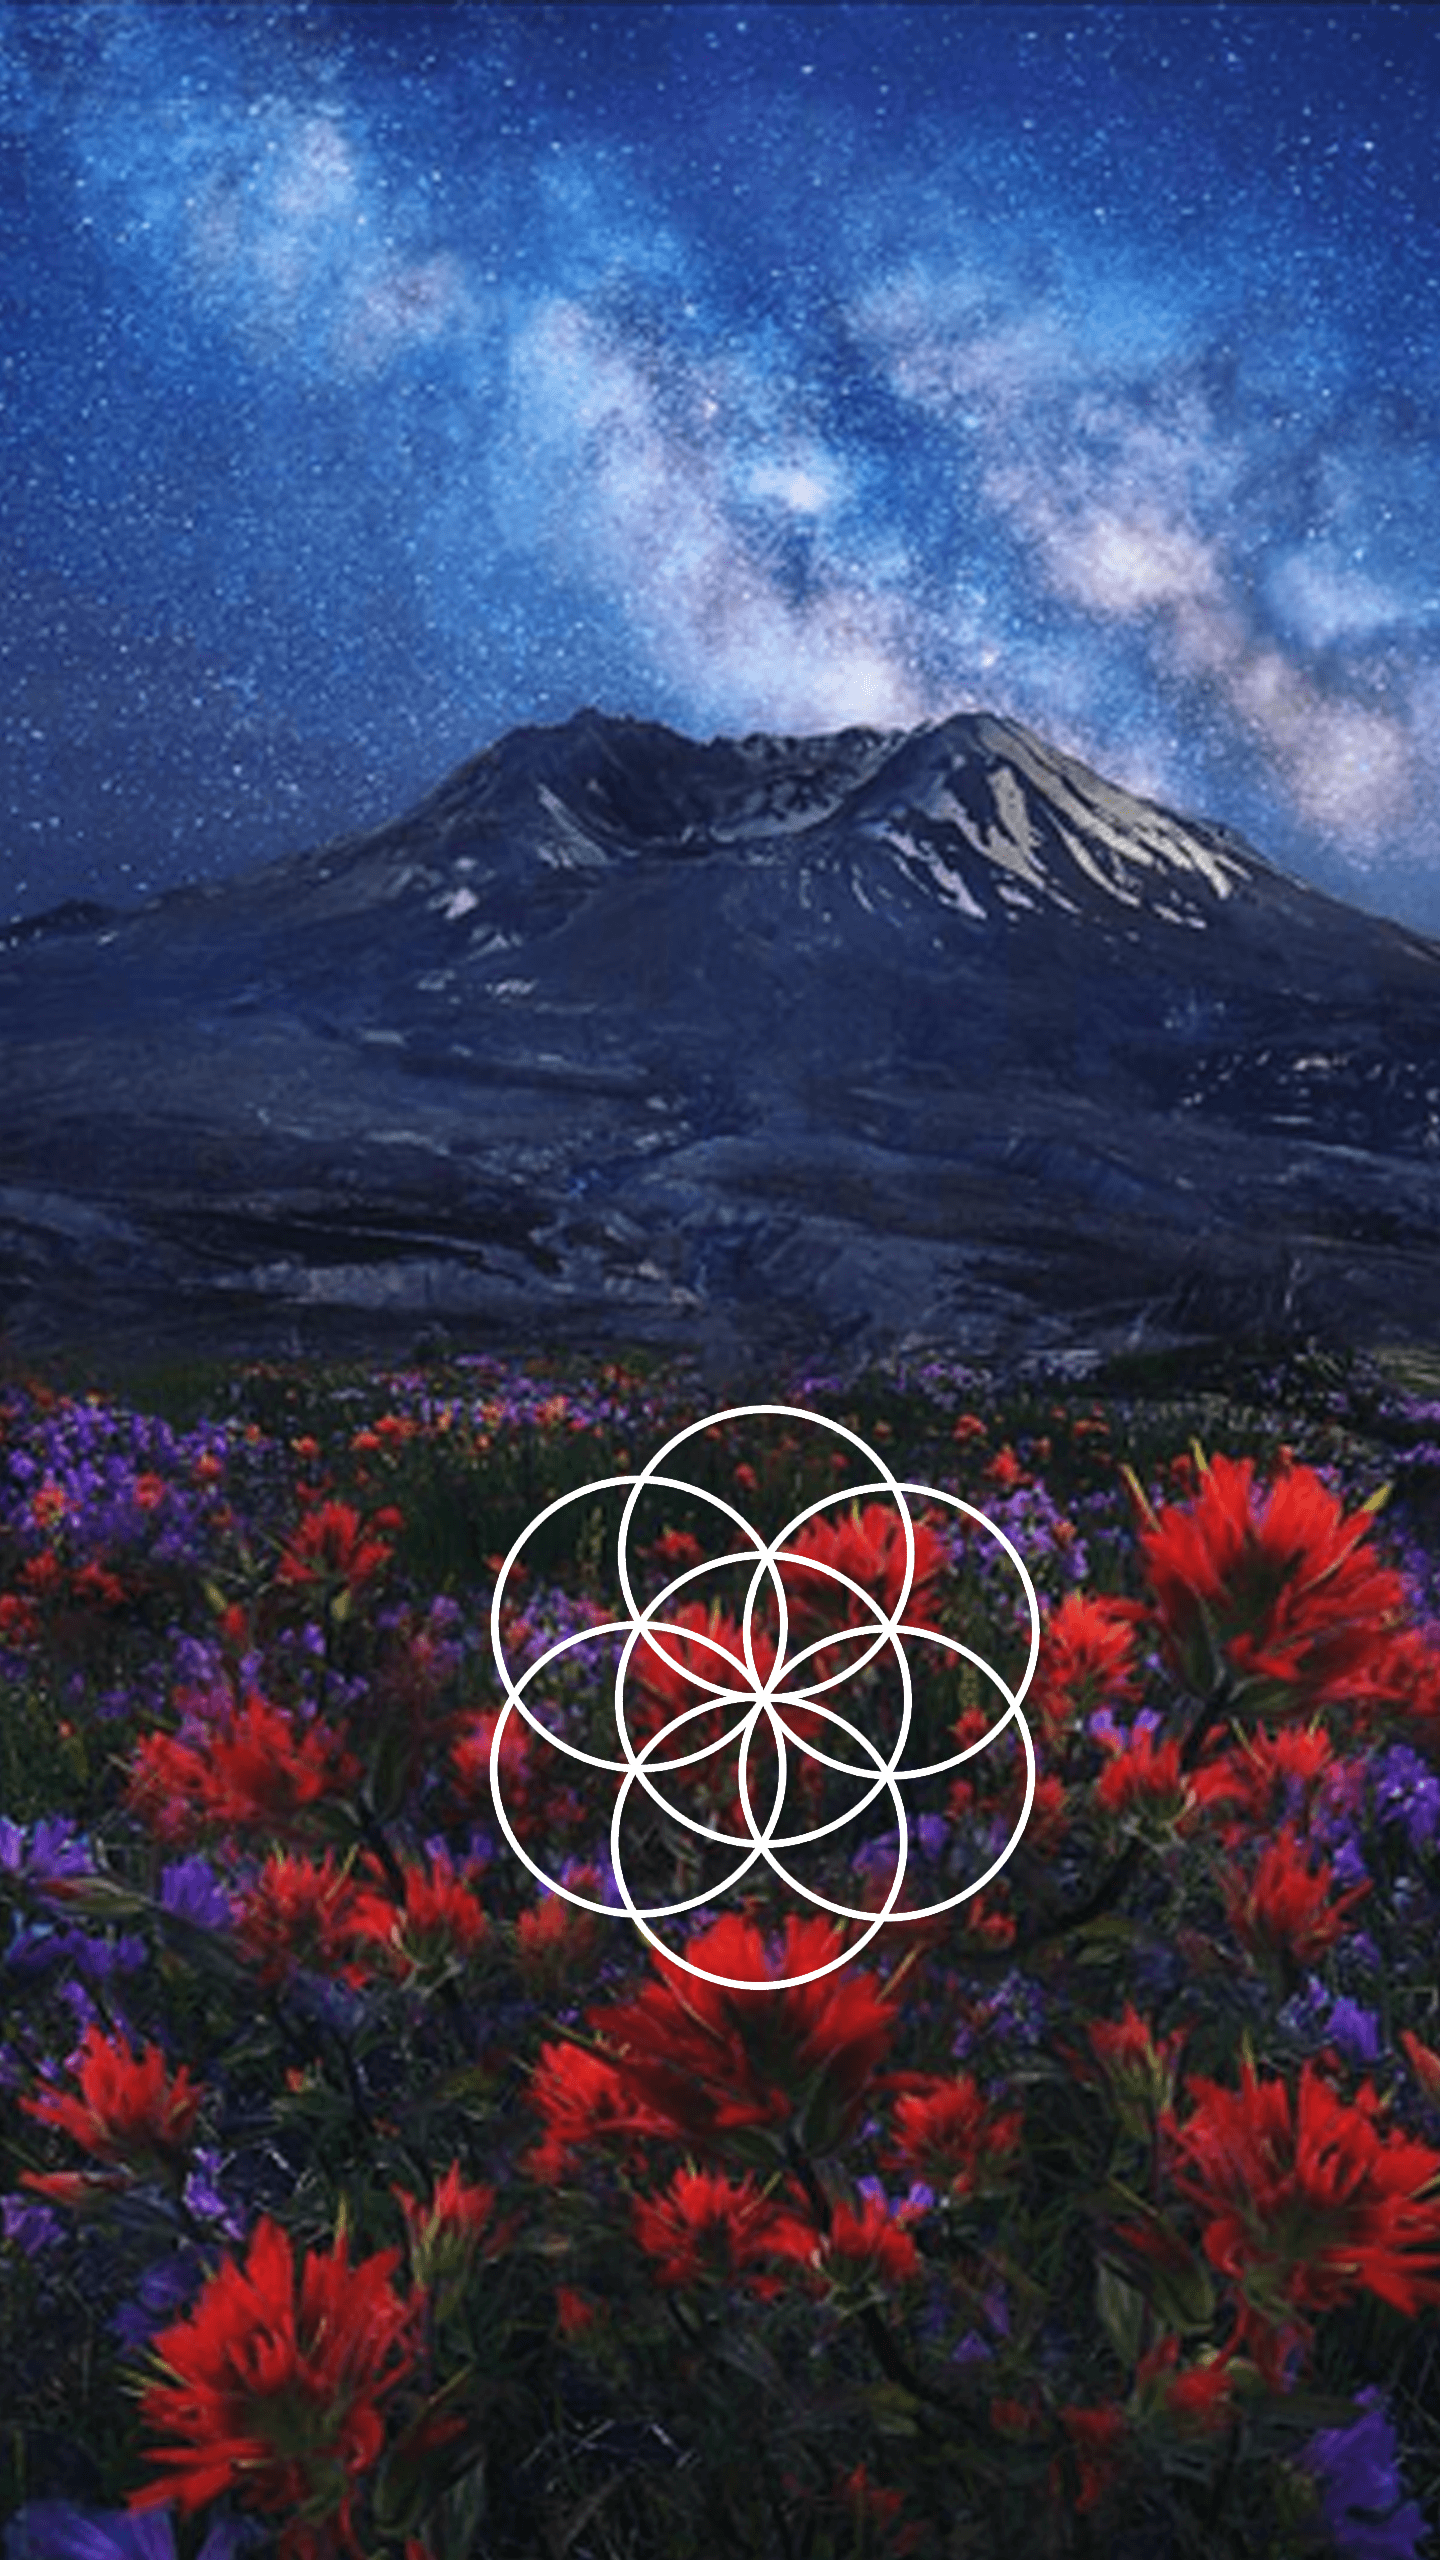 IPhone wallpaper of a mountain with flowers and the galaxy above - Spiritual